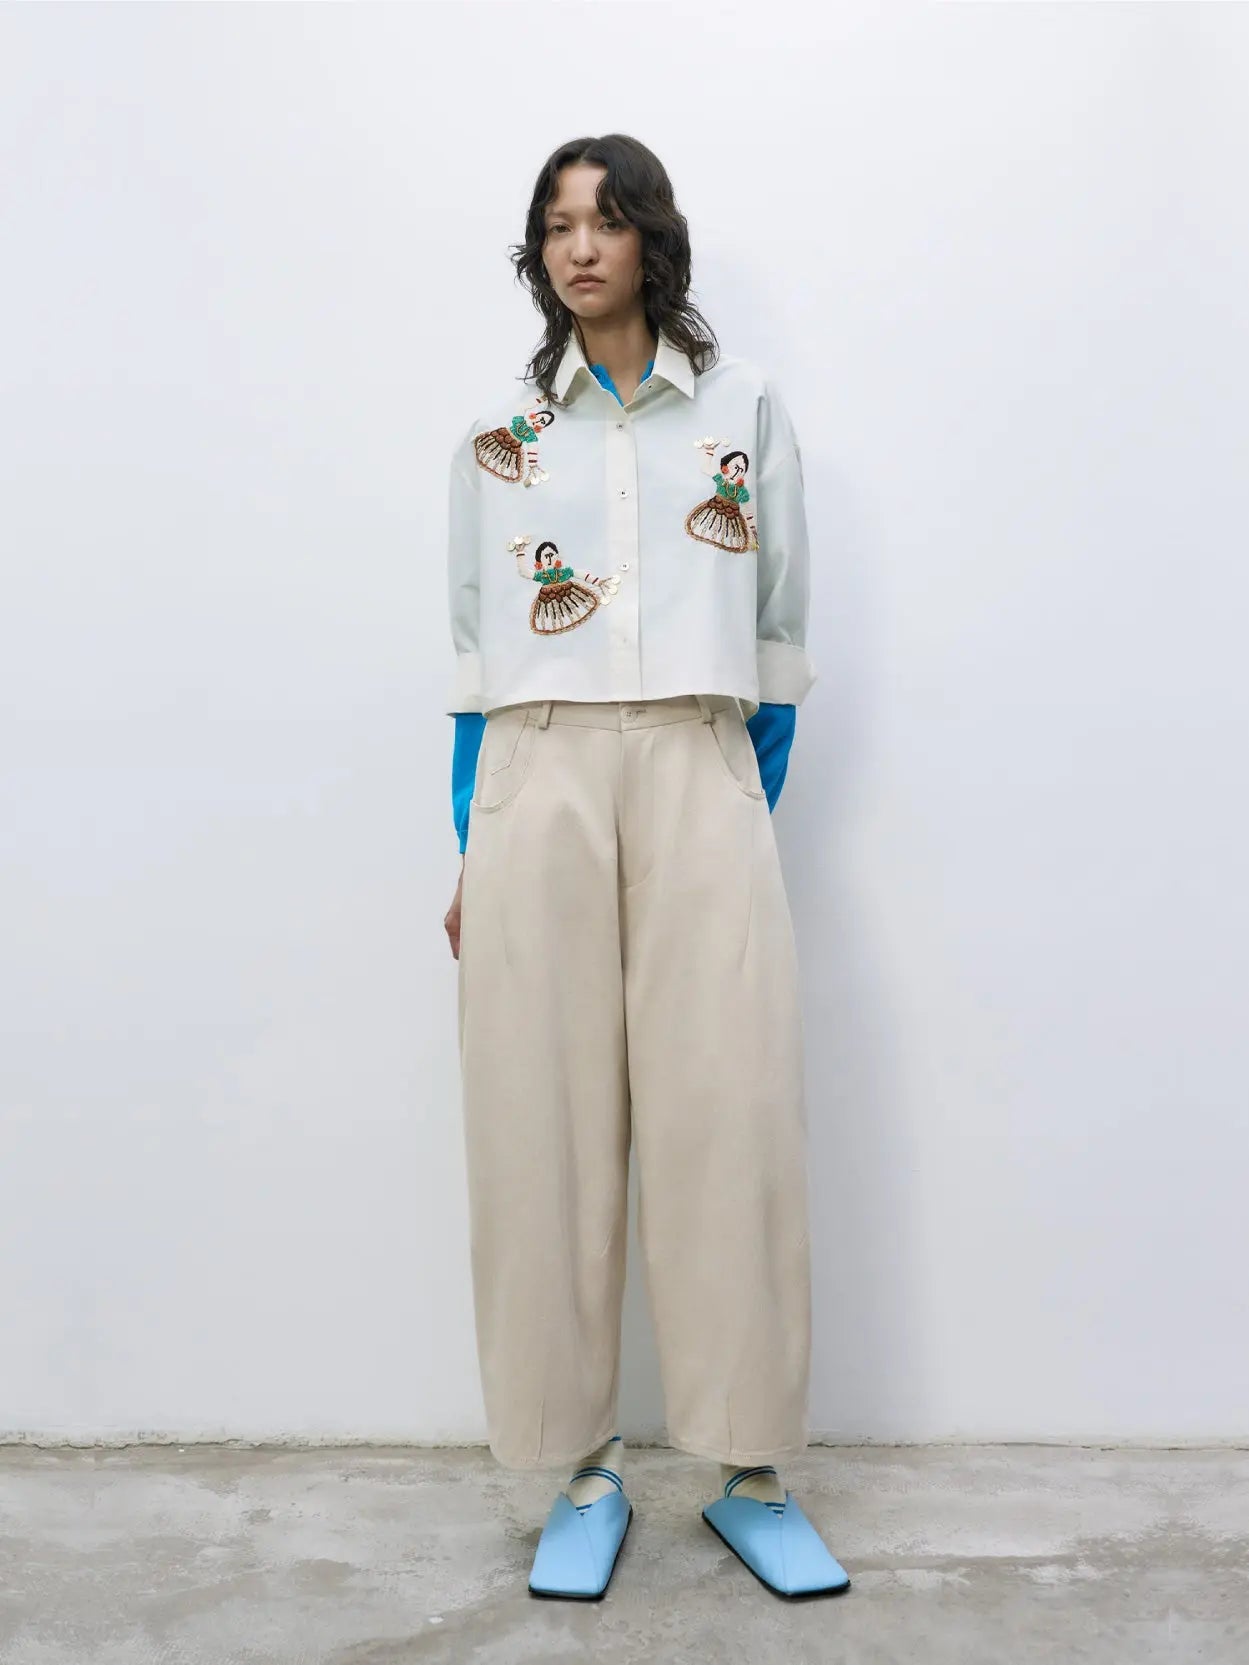 A pair of beige Baggy Pants Alabaster by Cordera with a high waist and a loose, slightly tapered fit, available at Bassal Store in Barcelona. The pants feature a button and zipper closure, belt loops, and front pockets. The fabric appears smooth and lightweight.